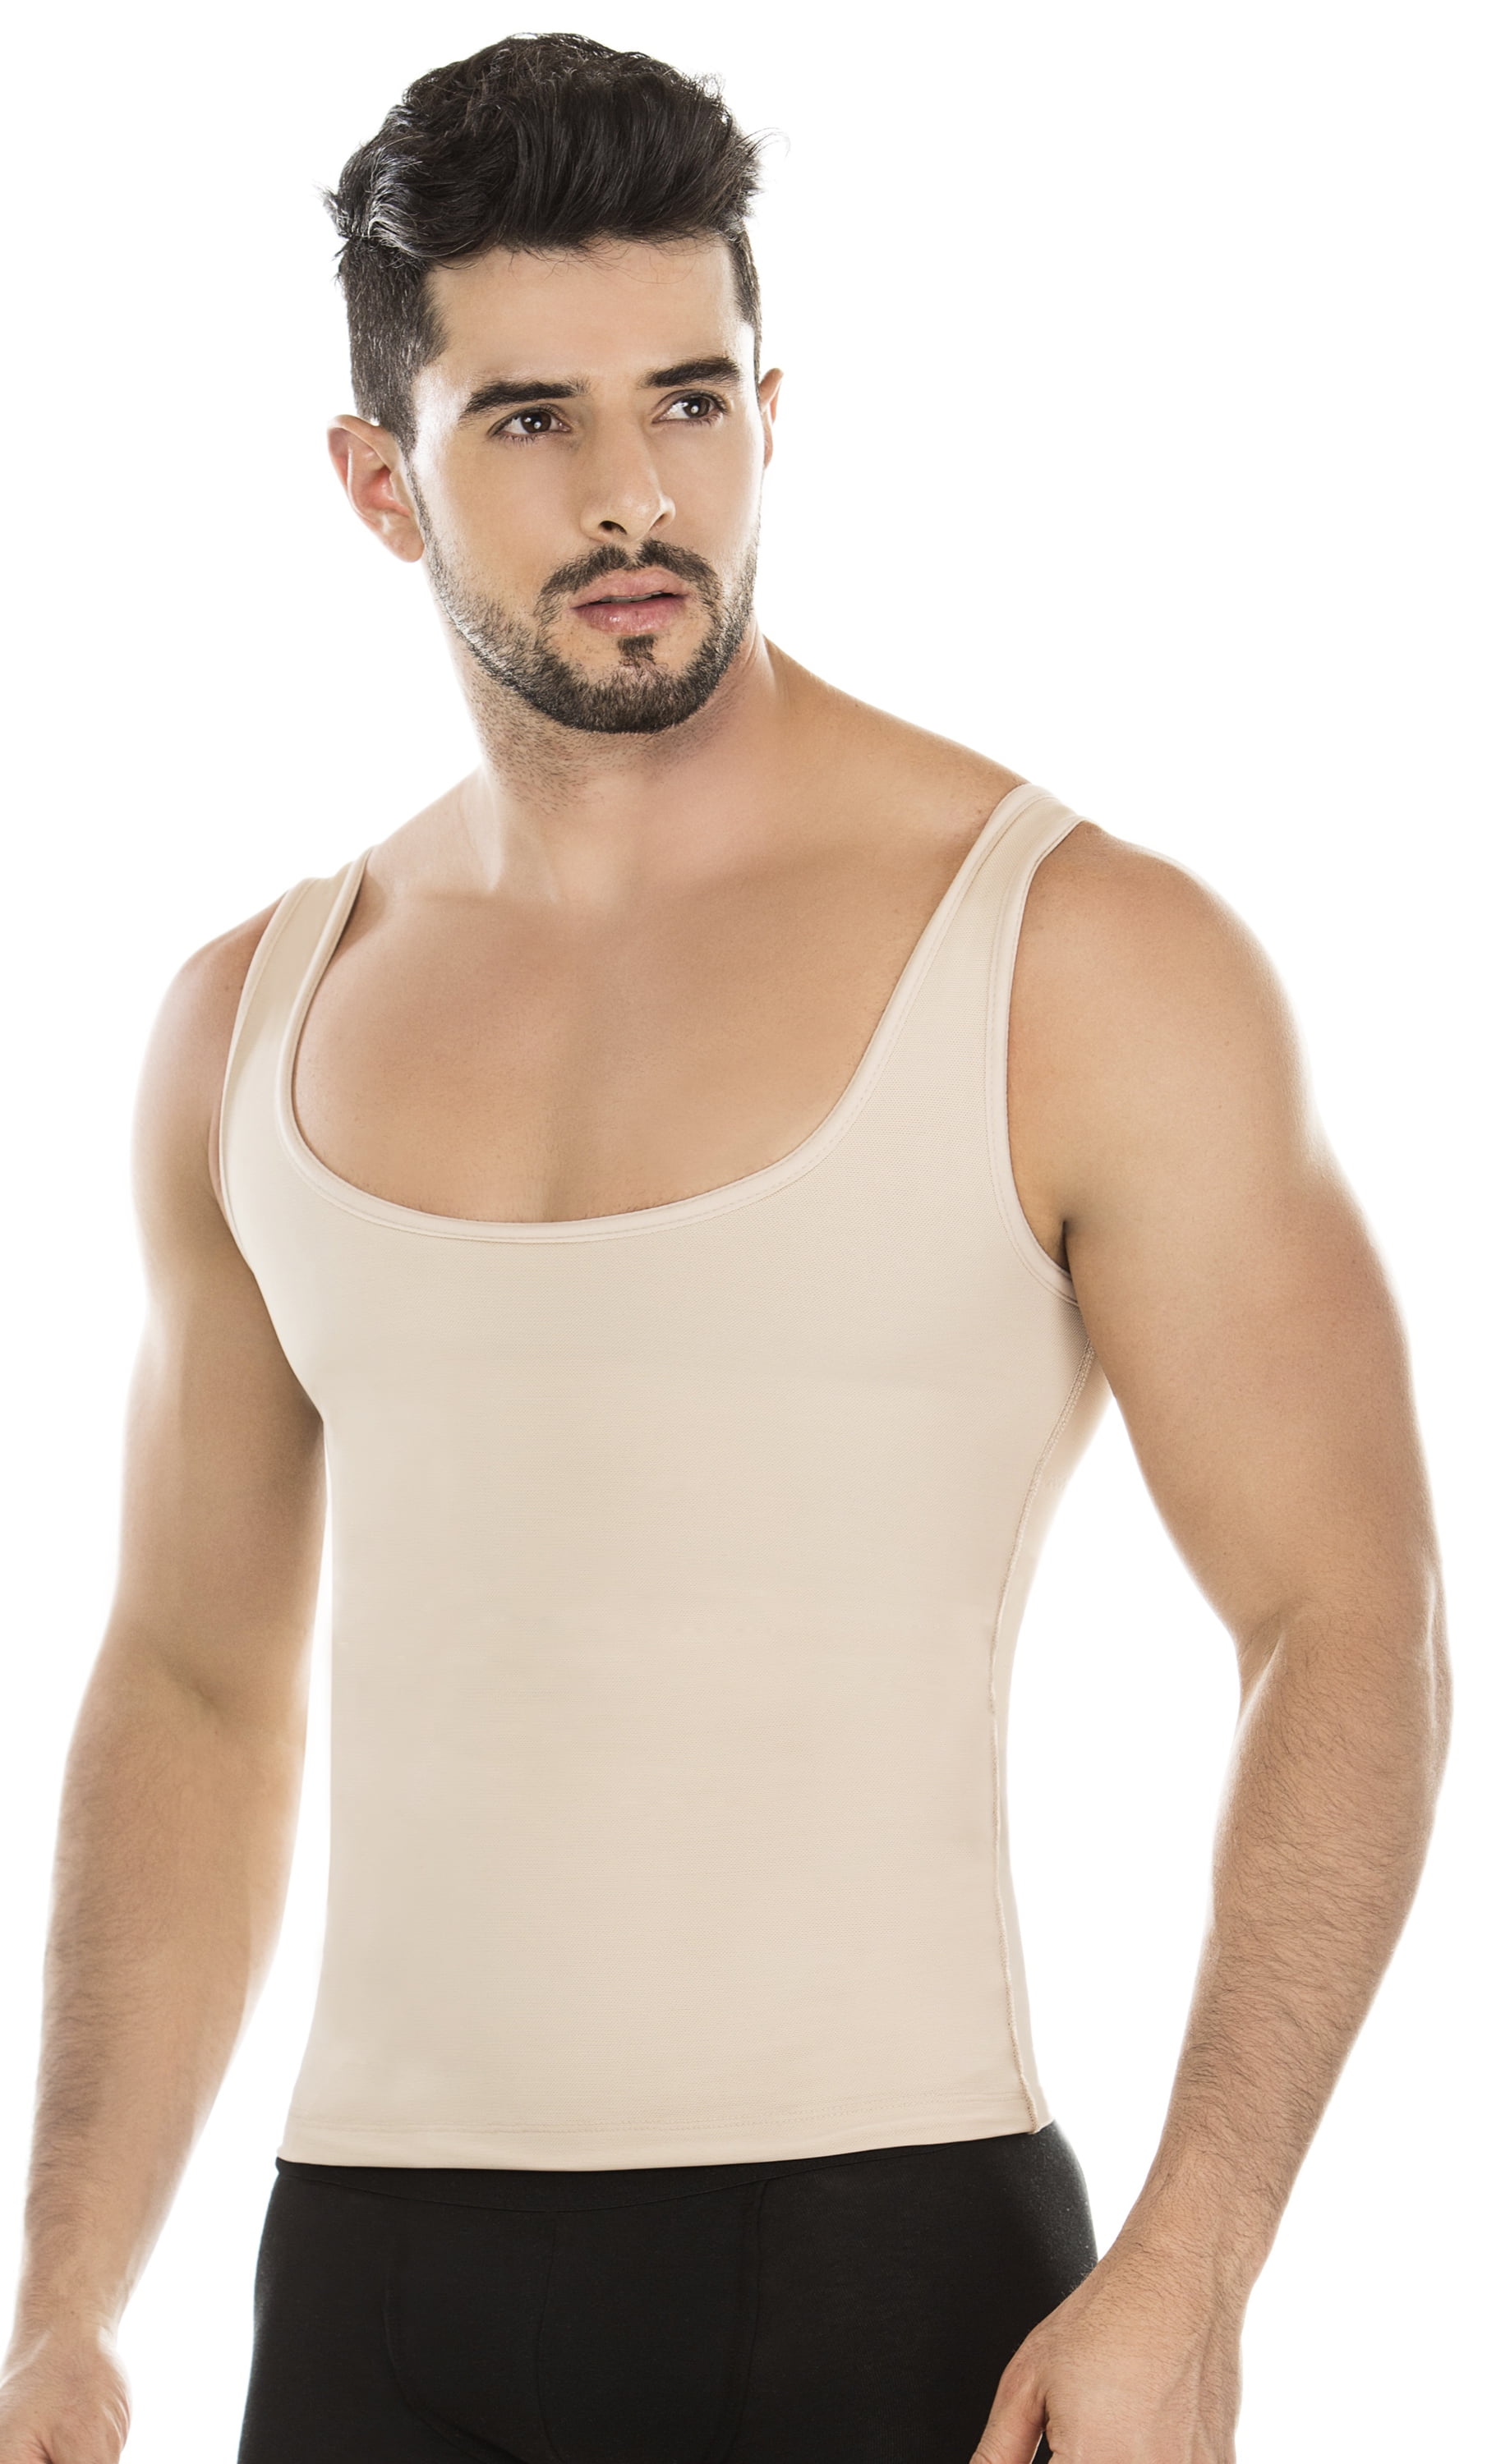 Shapewear & Fajas The Best Faja Fresh and Light Body Suit for men  Compression Shirt Seamless Firms up the Chest Back Pain Relief Abdomen  Trimmer